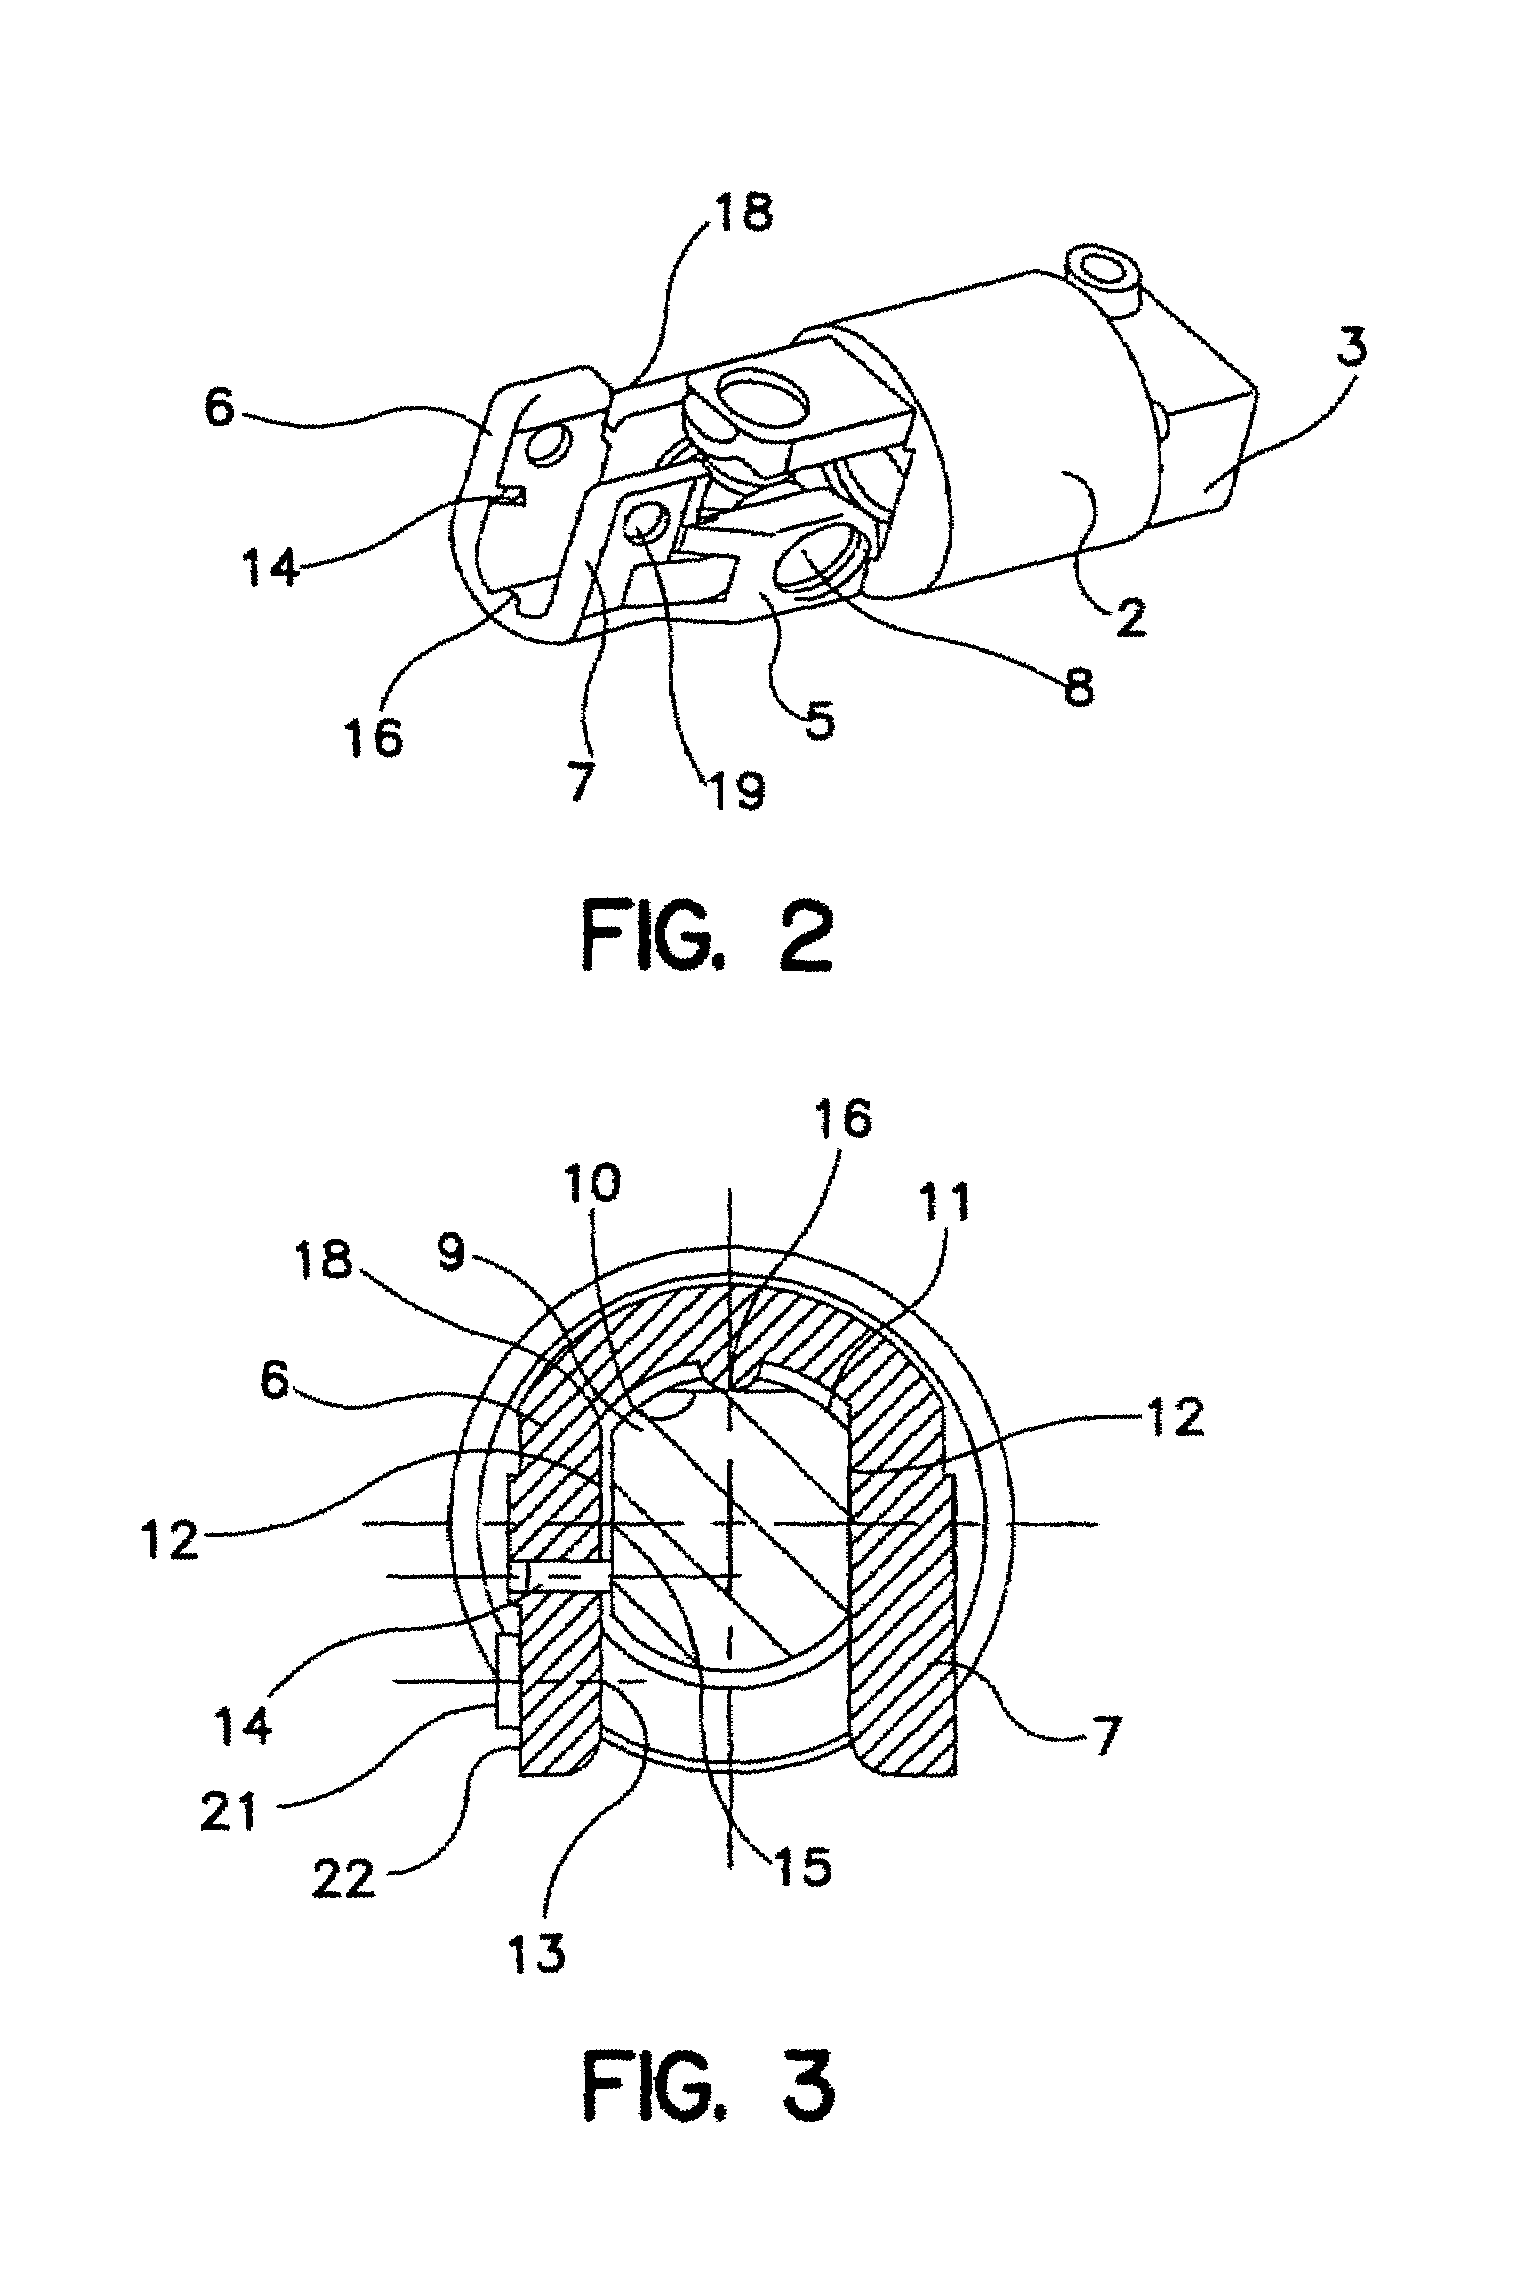 Connection between a steering mechanism and a steering column of a motor vehicle steering system